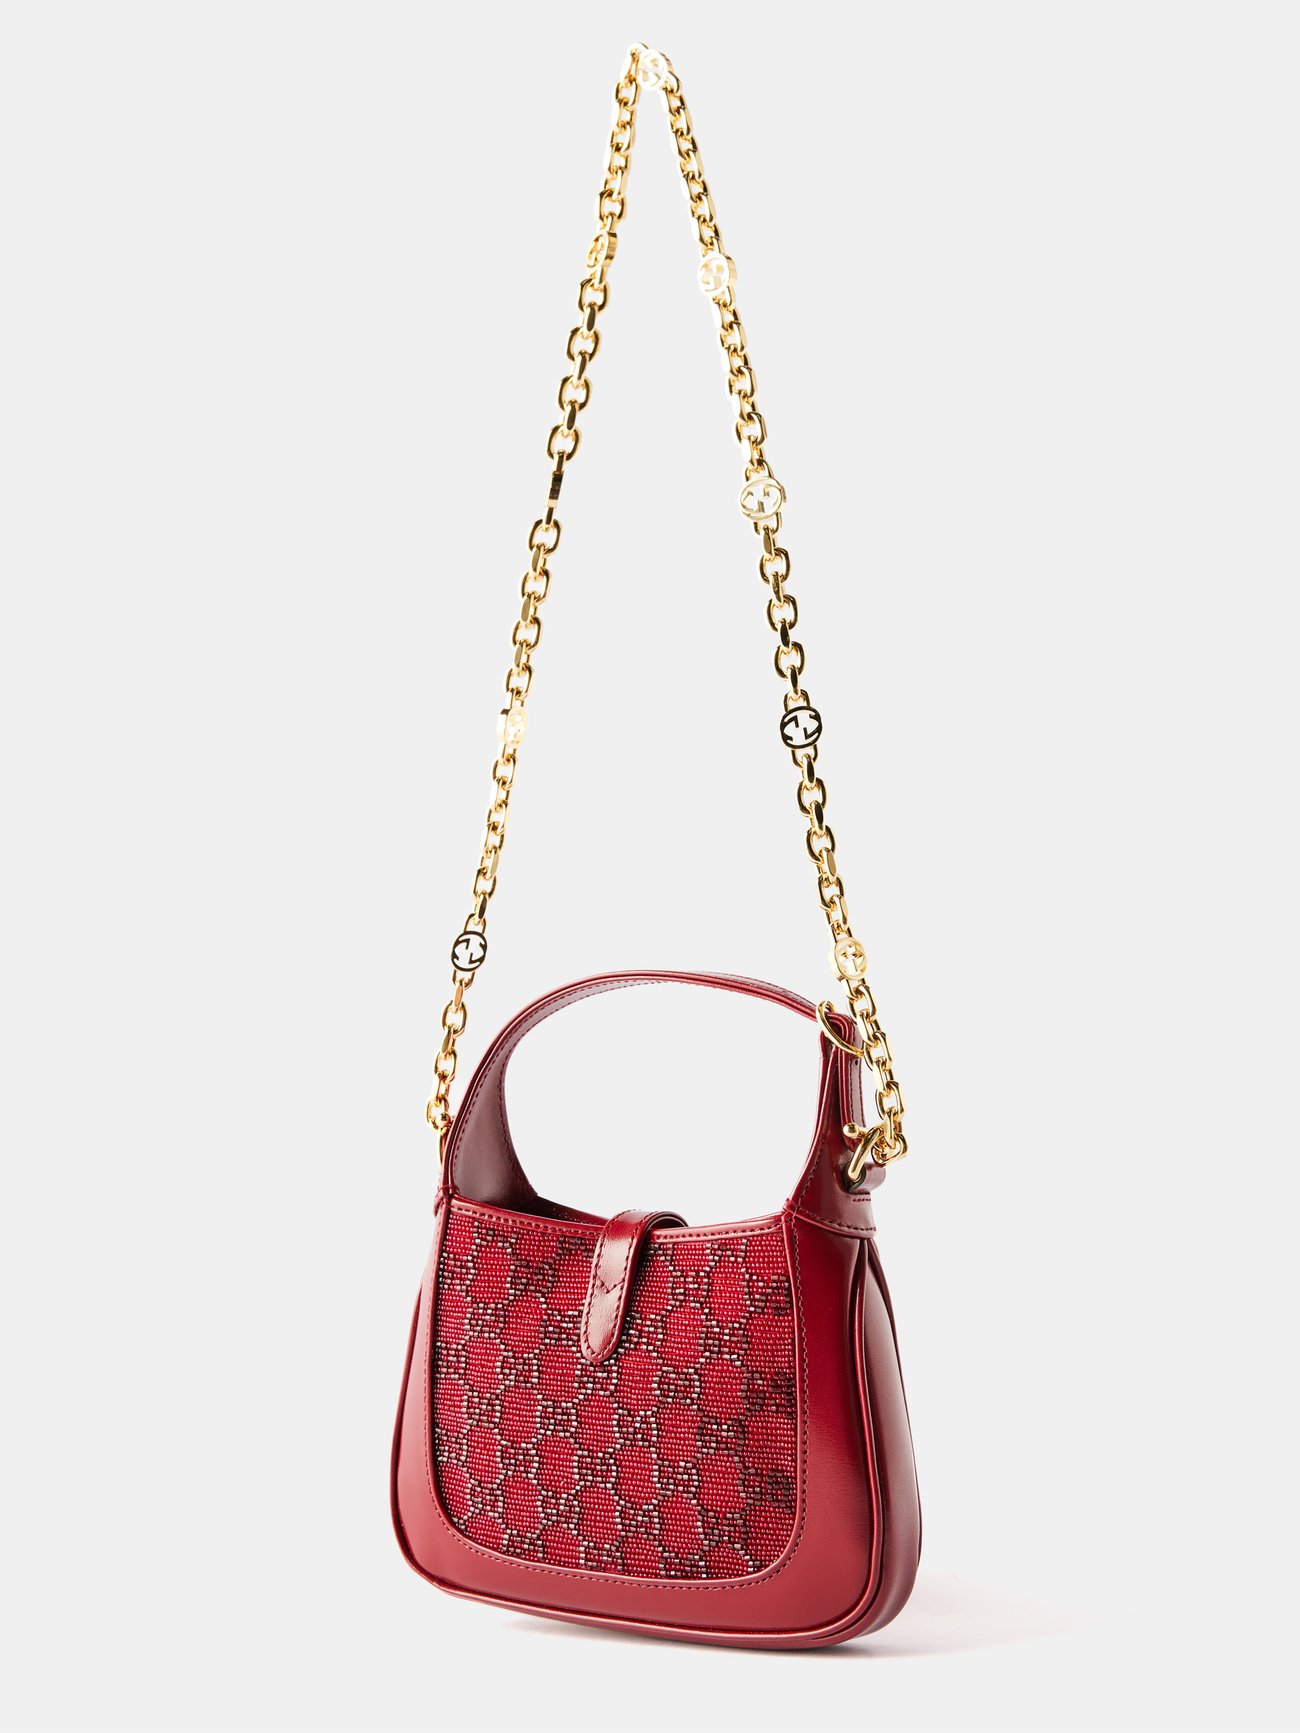 The Jackie 1961: Gucci's Classic Handbag Re-Emerges - MOJEH